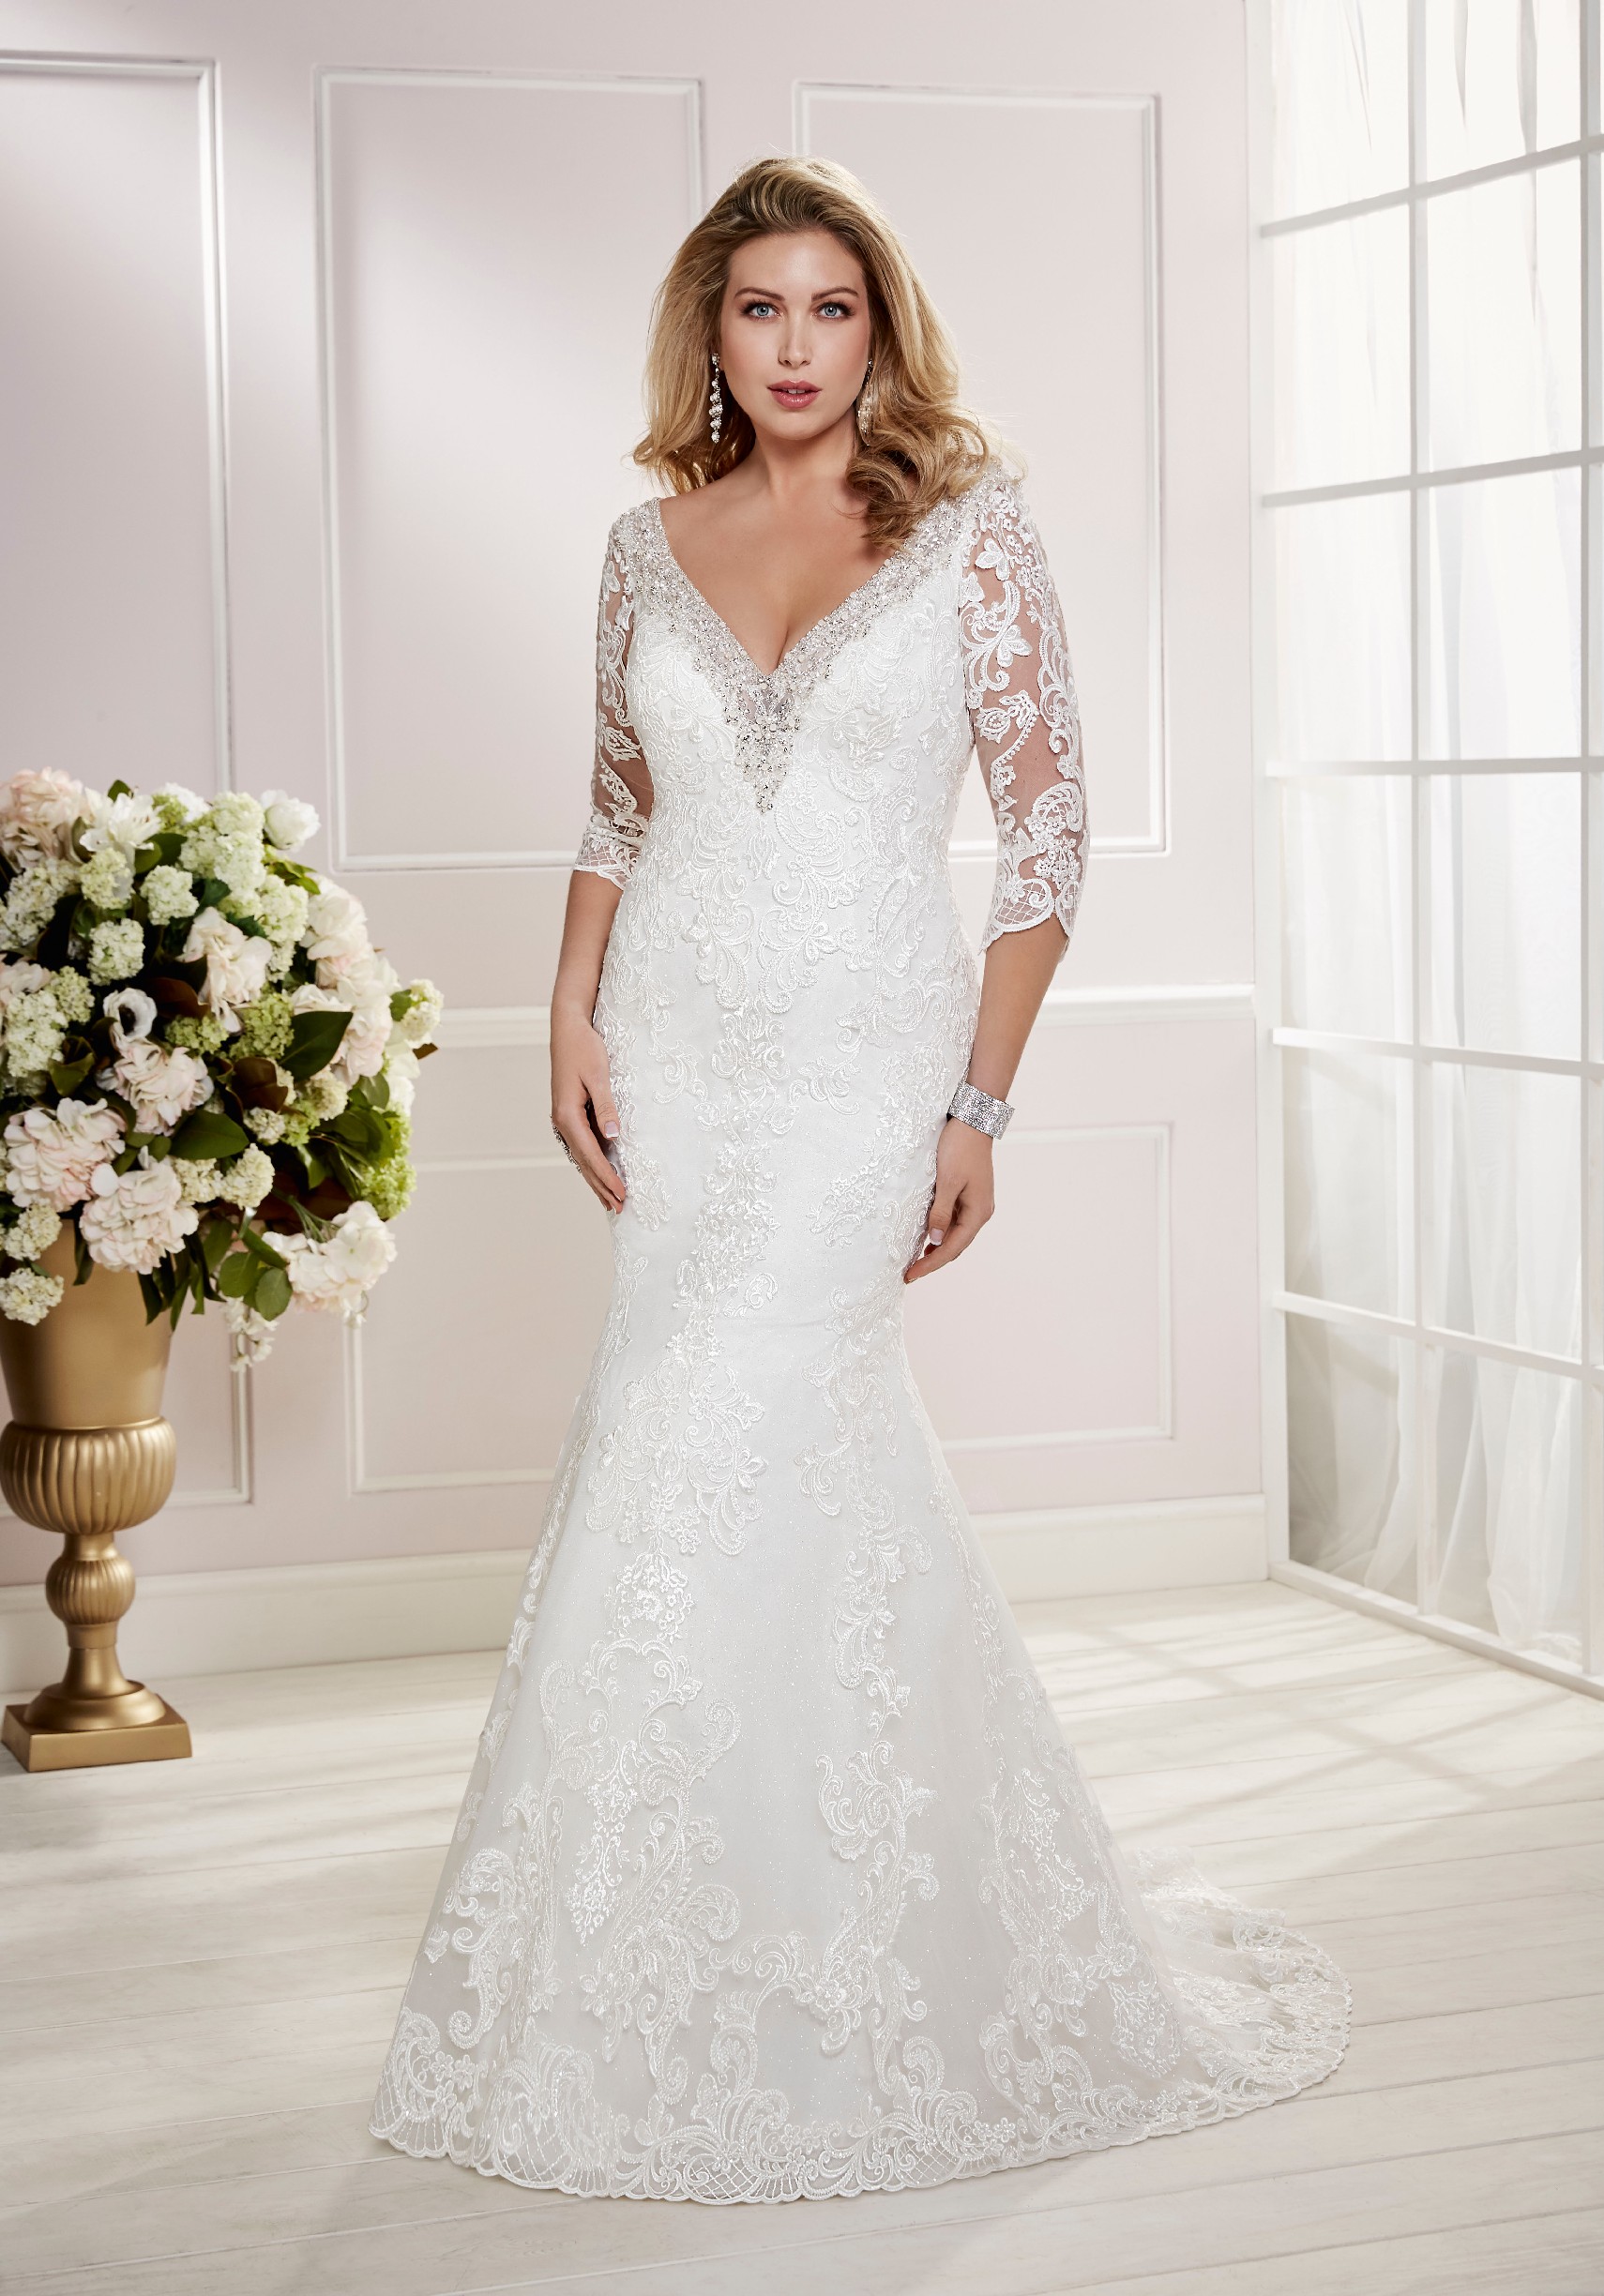 Curvy model in Ronald Joyce plus size wedding dress style 69474, an ivory fit and flare dress with lace illusion 3/4 sleeves and a plunging neckline edged with beading 